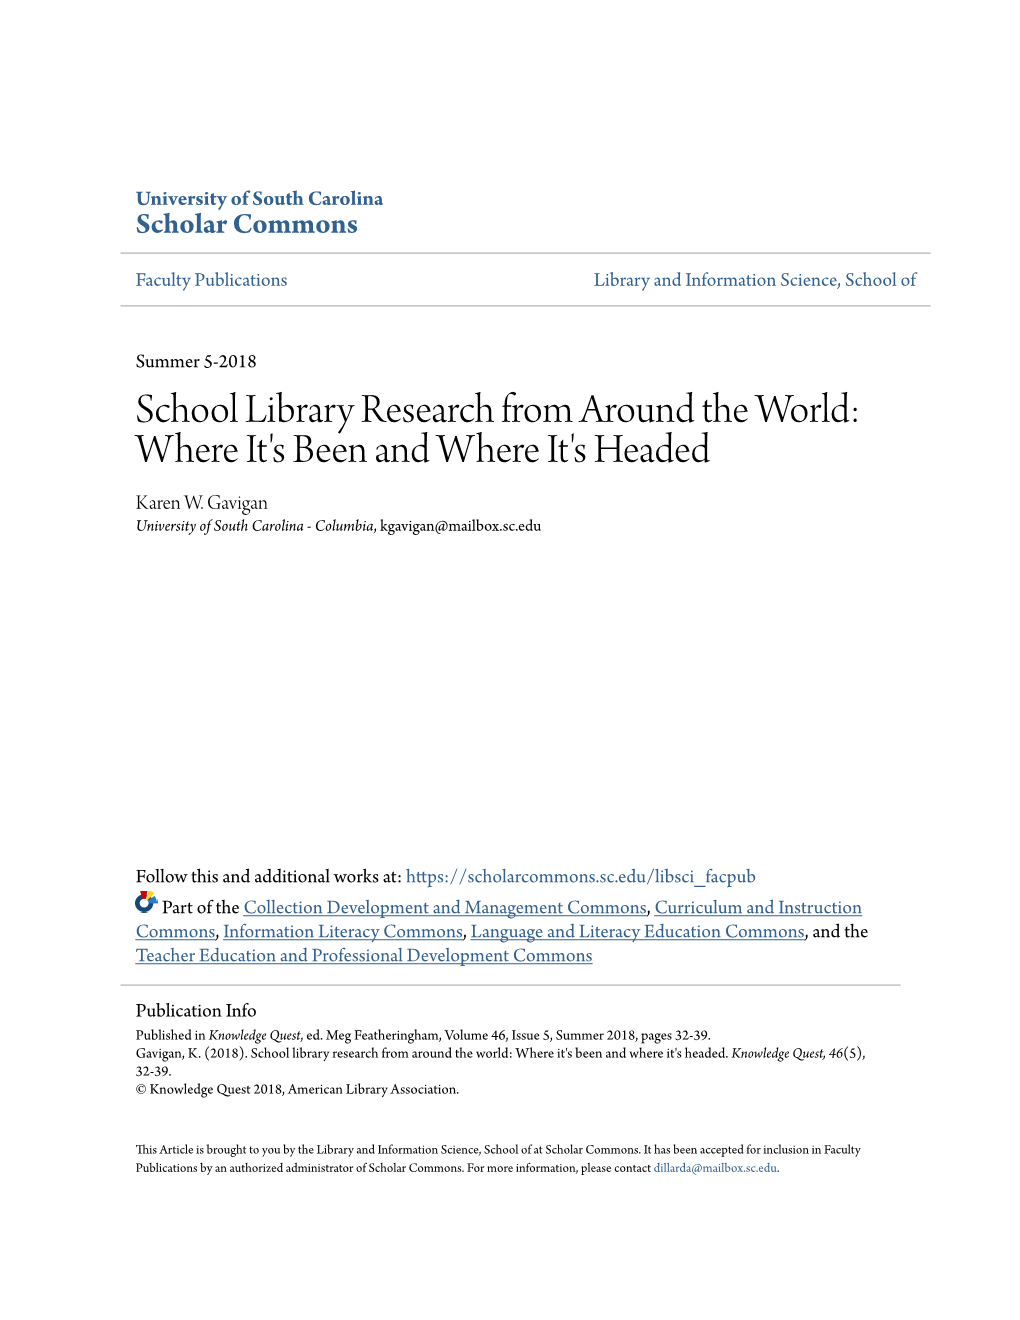 School Library Research from Around the World: Where It's Been and Where It's Headed Karen W